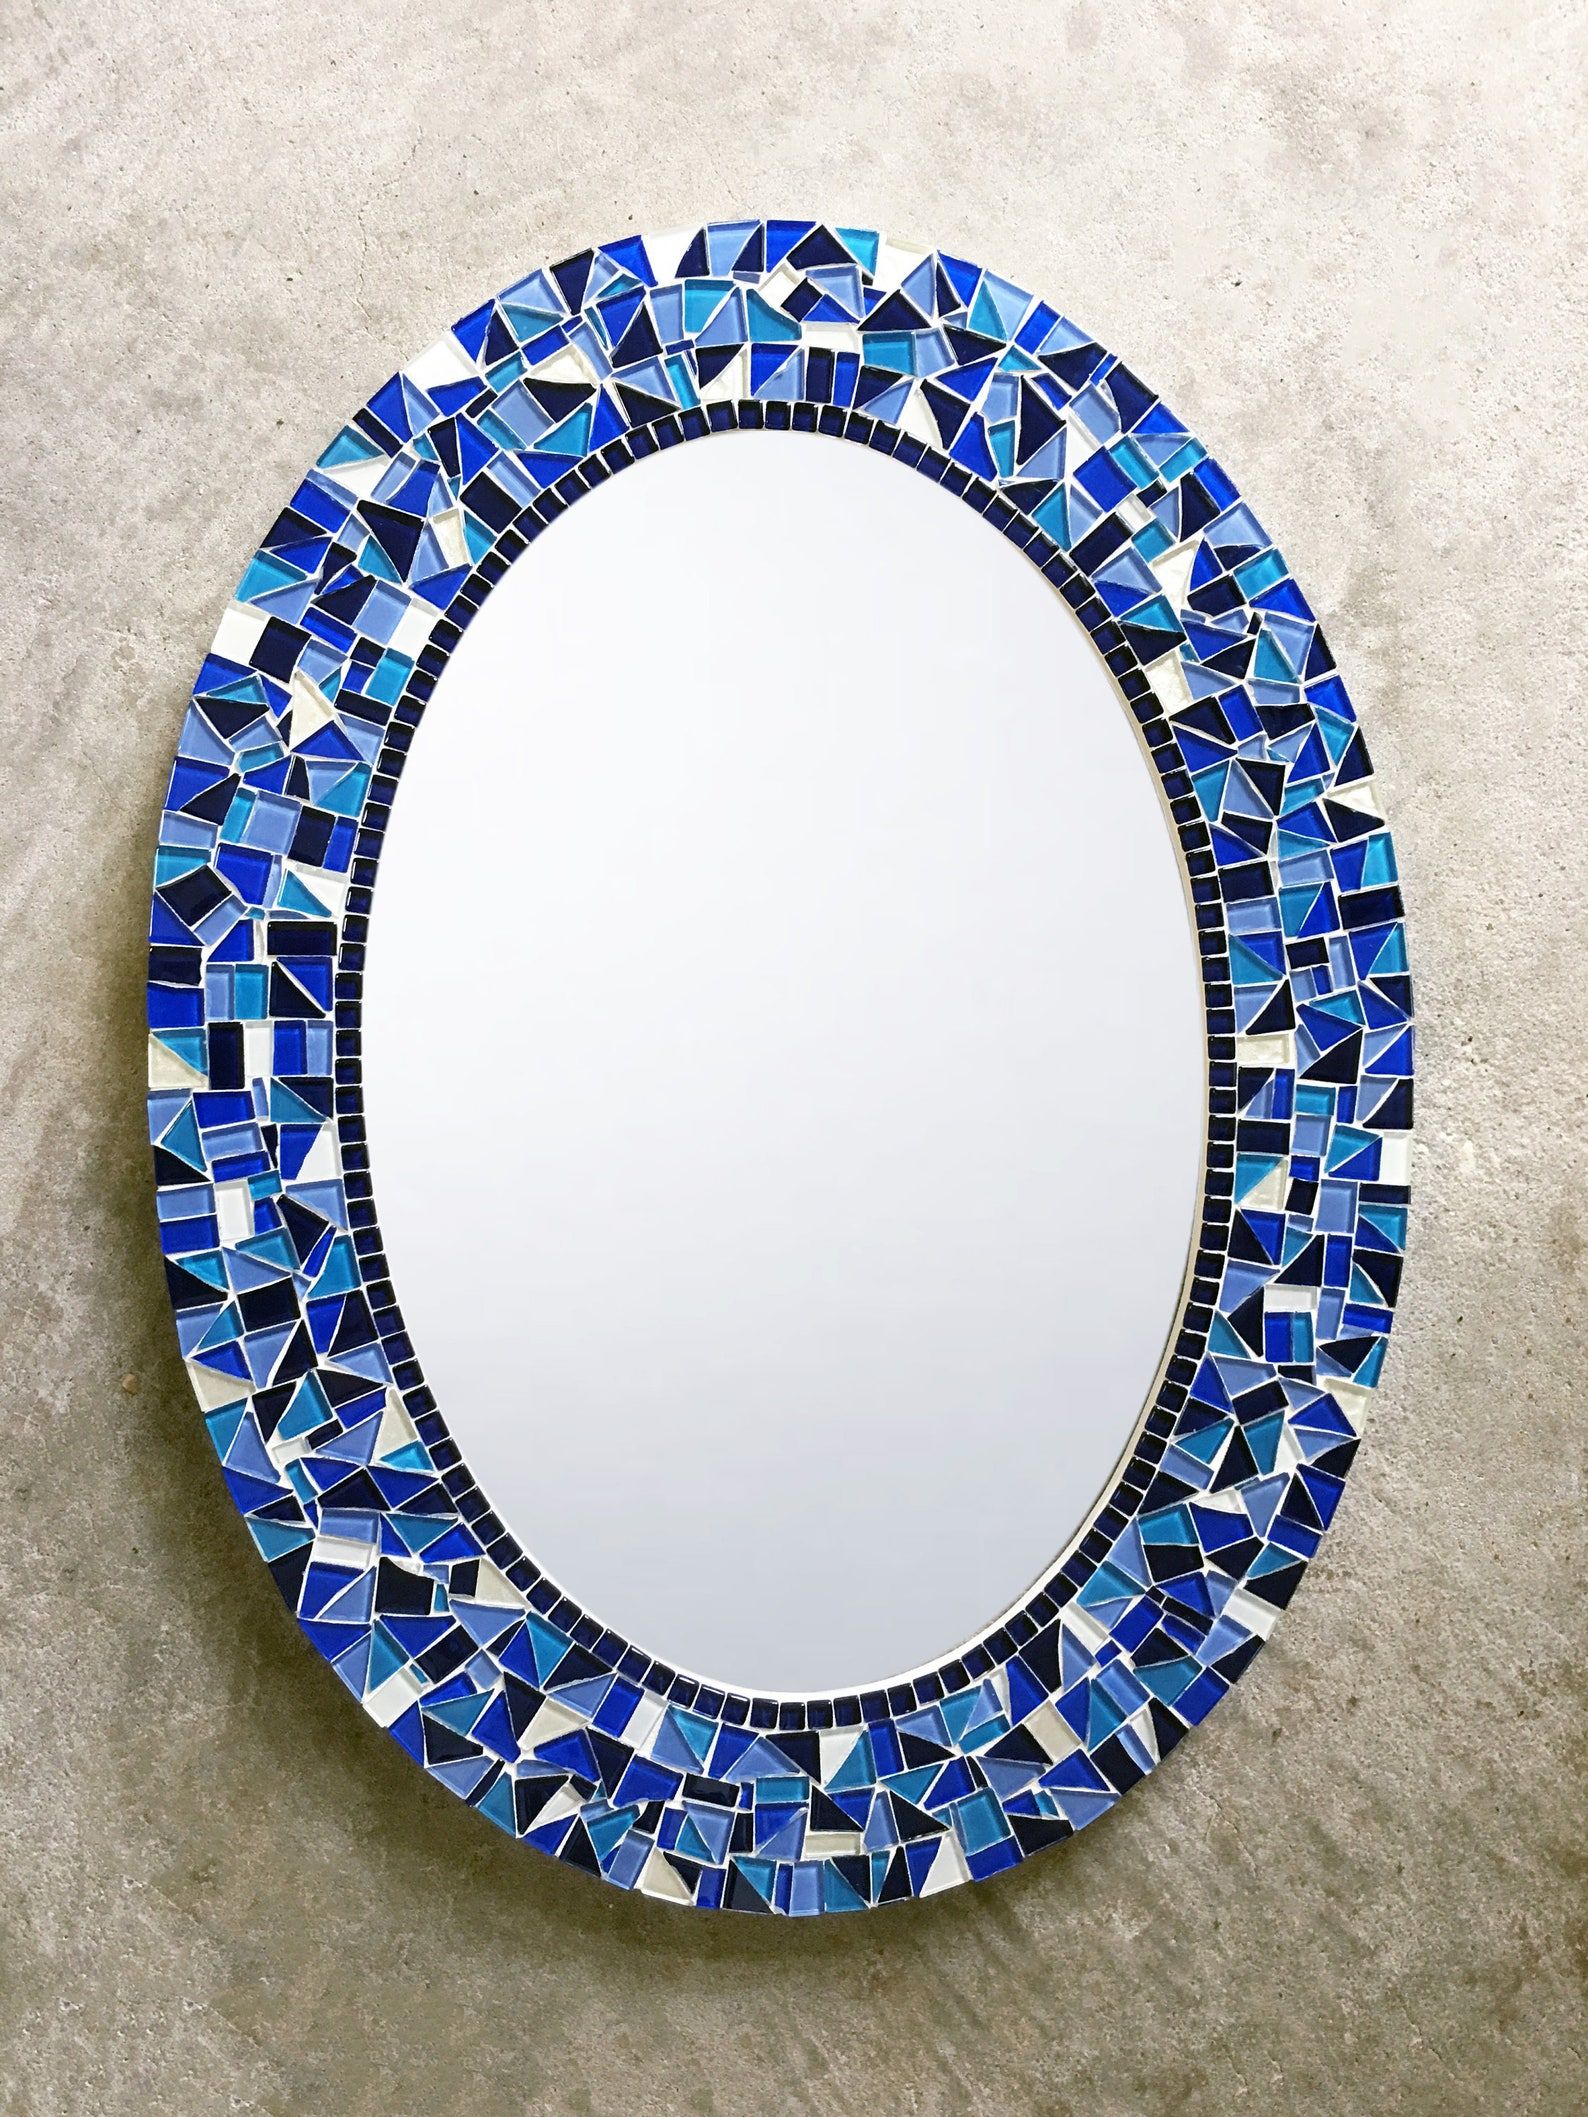 Blue Wall Mirror Oval Mosaic Mirror | Etsy Intended For Mosaic Oval Wall Mirrors (View 9 of 15)